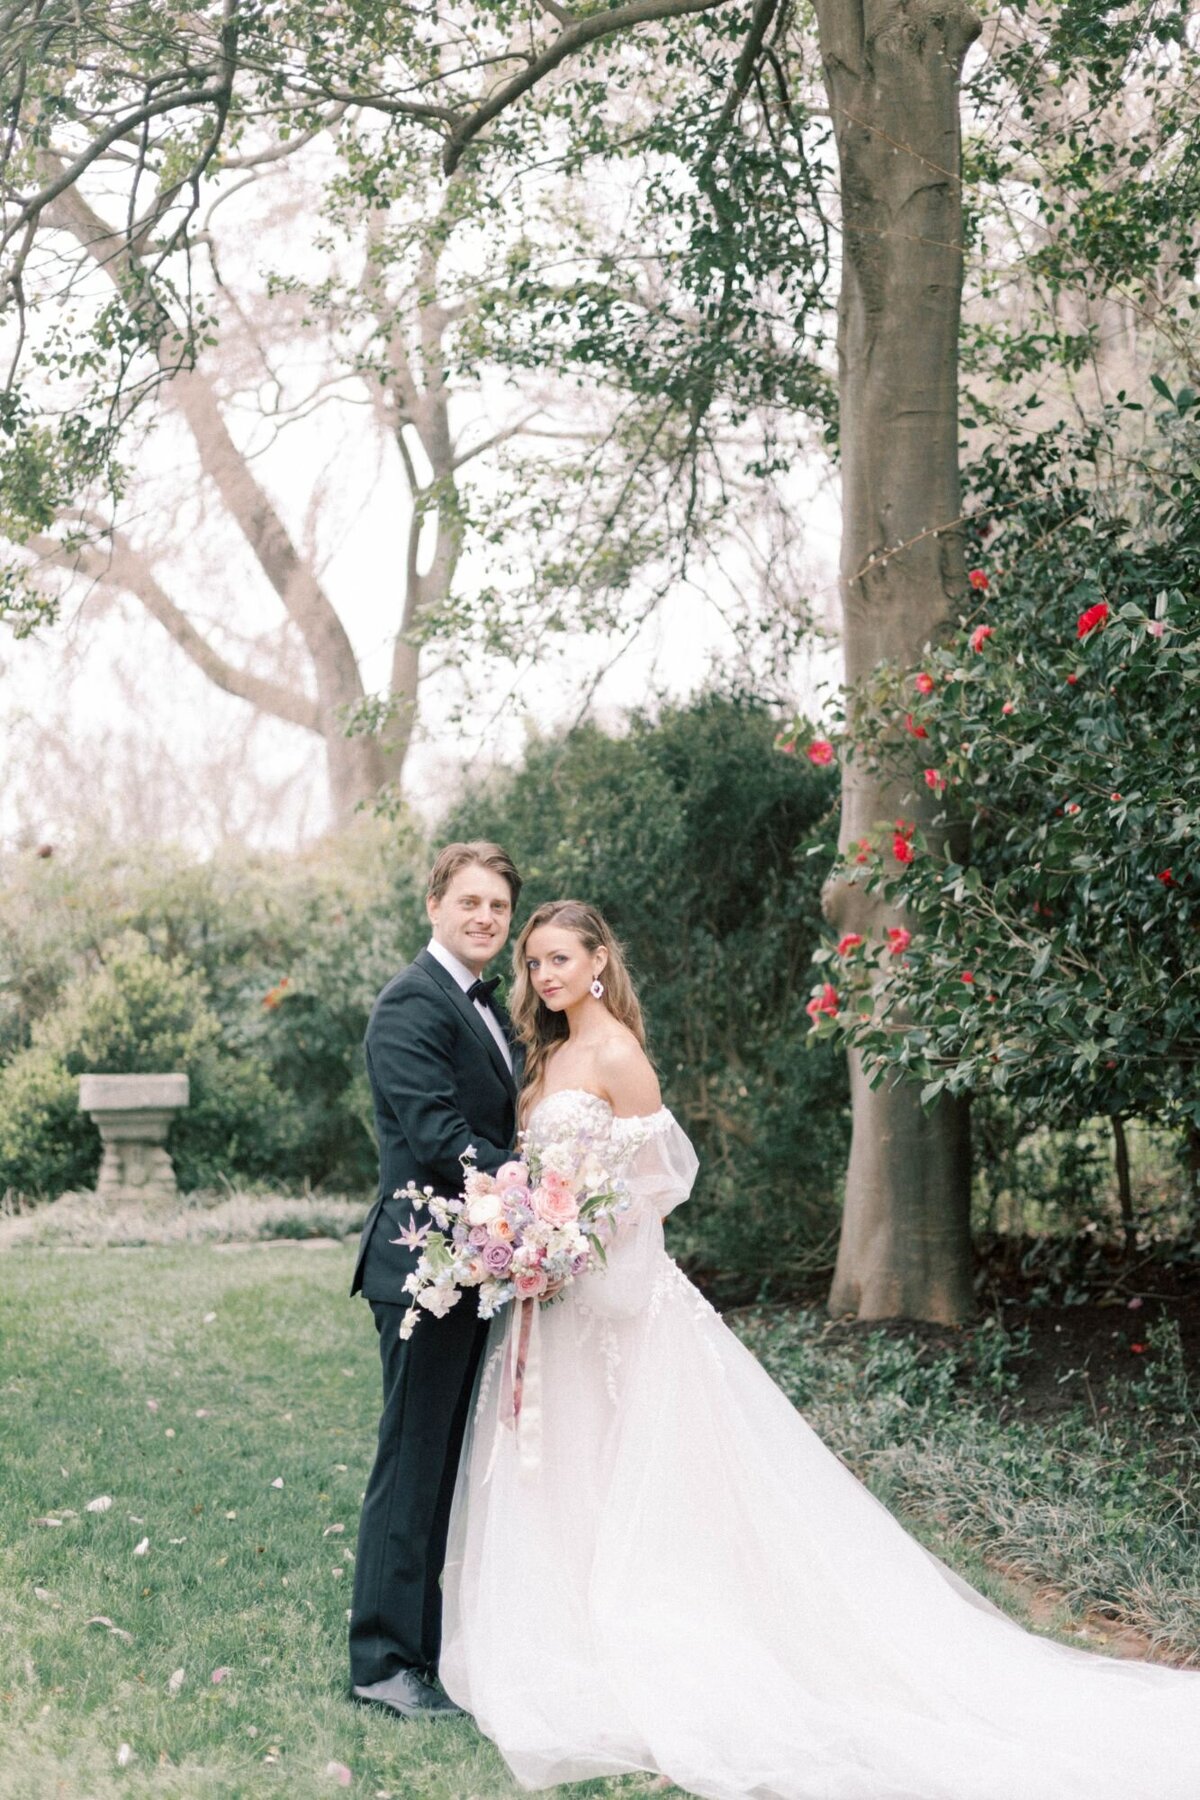 Bride and groom smiling in grass field with large trees.